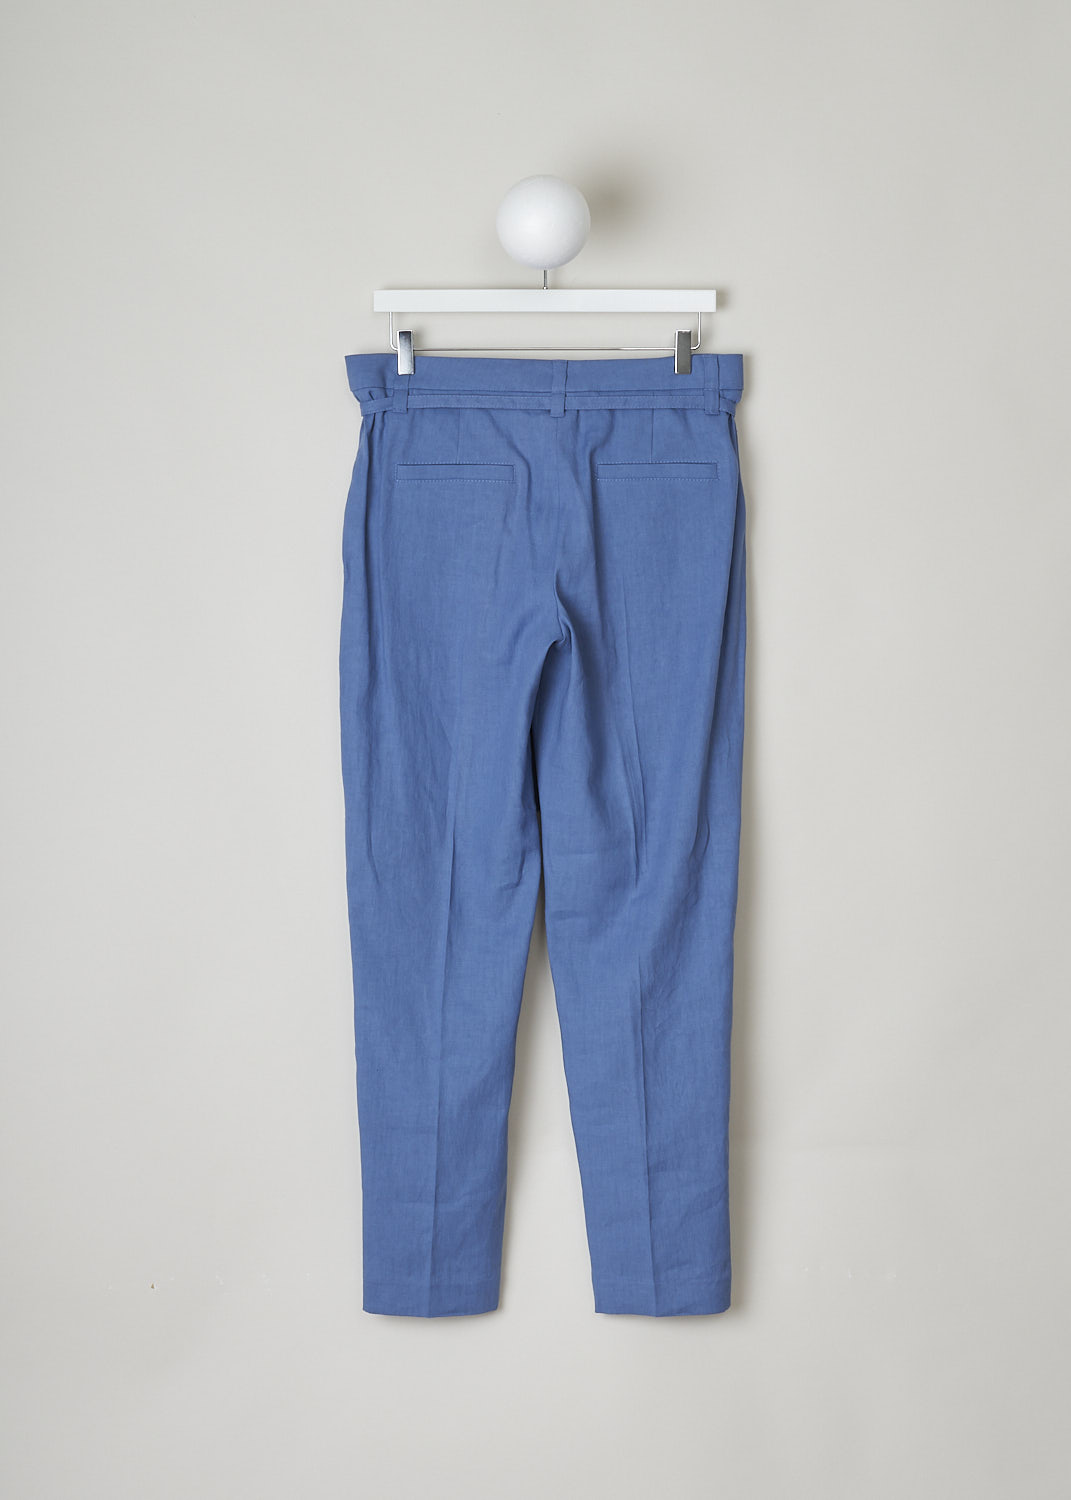 BRUNELLO CUCINELLI, BLUE LINEN PANTS WITH MATCHING BELT, MF591P7453_C8593, Blue, Back, These blue linen pants have a concealed clasp and zipper closure and a matching fabric belt with a double D-ring buckle. The belt is subtly decorated with Monilli beads. These pants have a pleated front and tapered pant legs with centre creases. In the front, slanted pockets can be found. In the back, these pants have welt pockets. 
